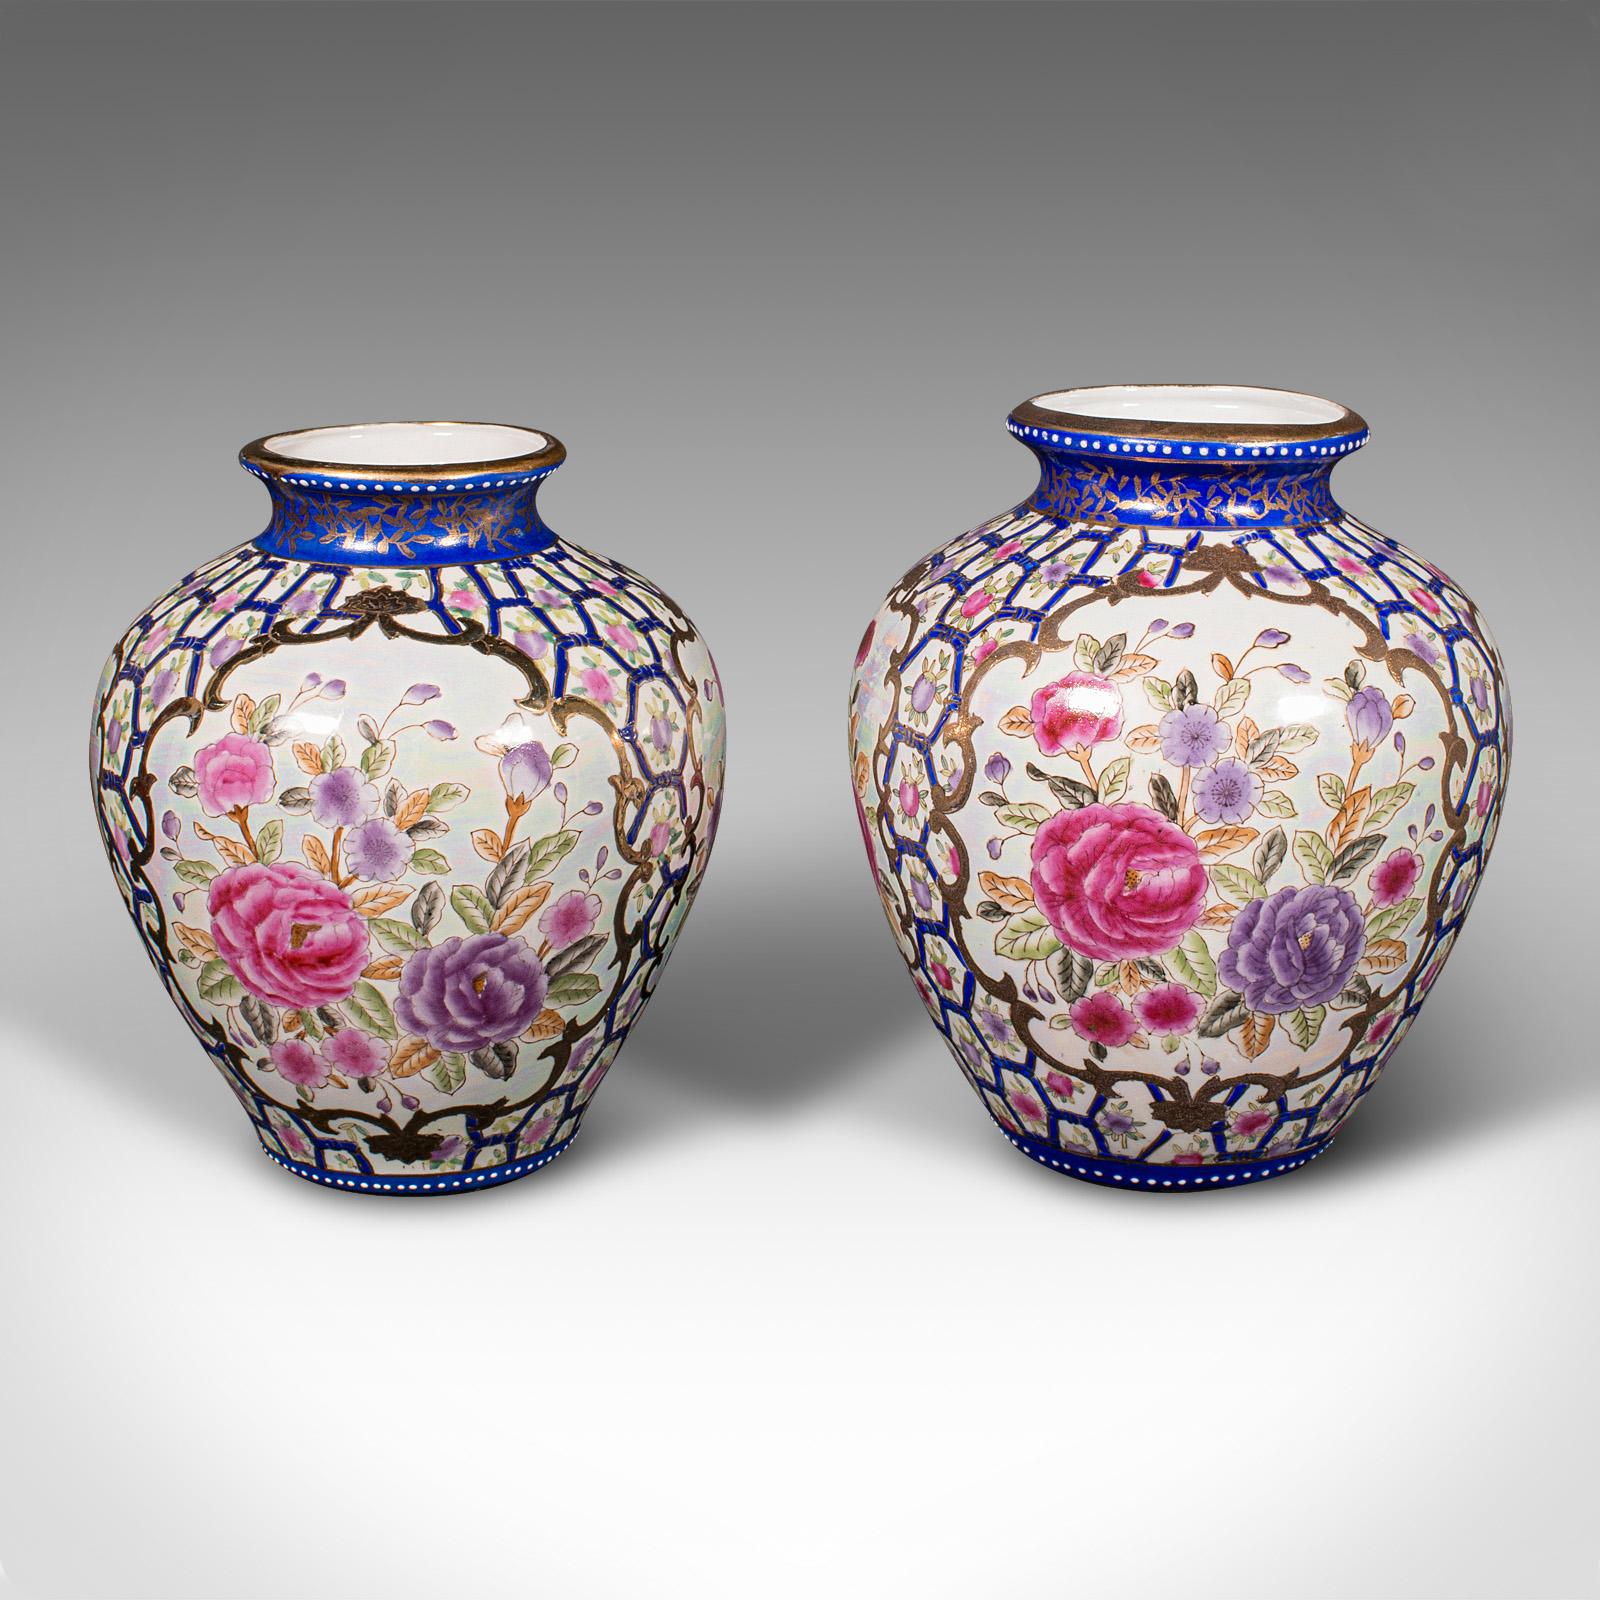 This is an artisan pair of vintage baluster vases. A Chinese, handpainted enamel and lustre decorative urn, dating to the Art Deco period, circa 1940.

Eye-catching and tactile, with wonderful foliate decor
Displaying a desirable aged patina and in